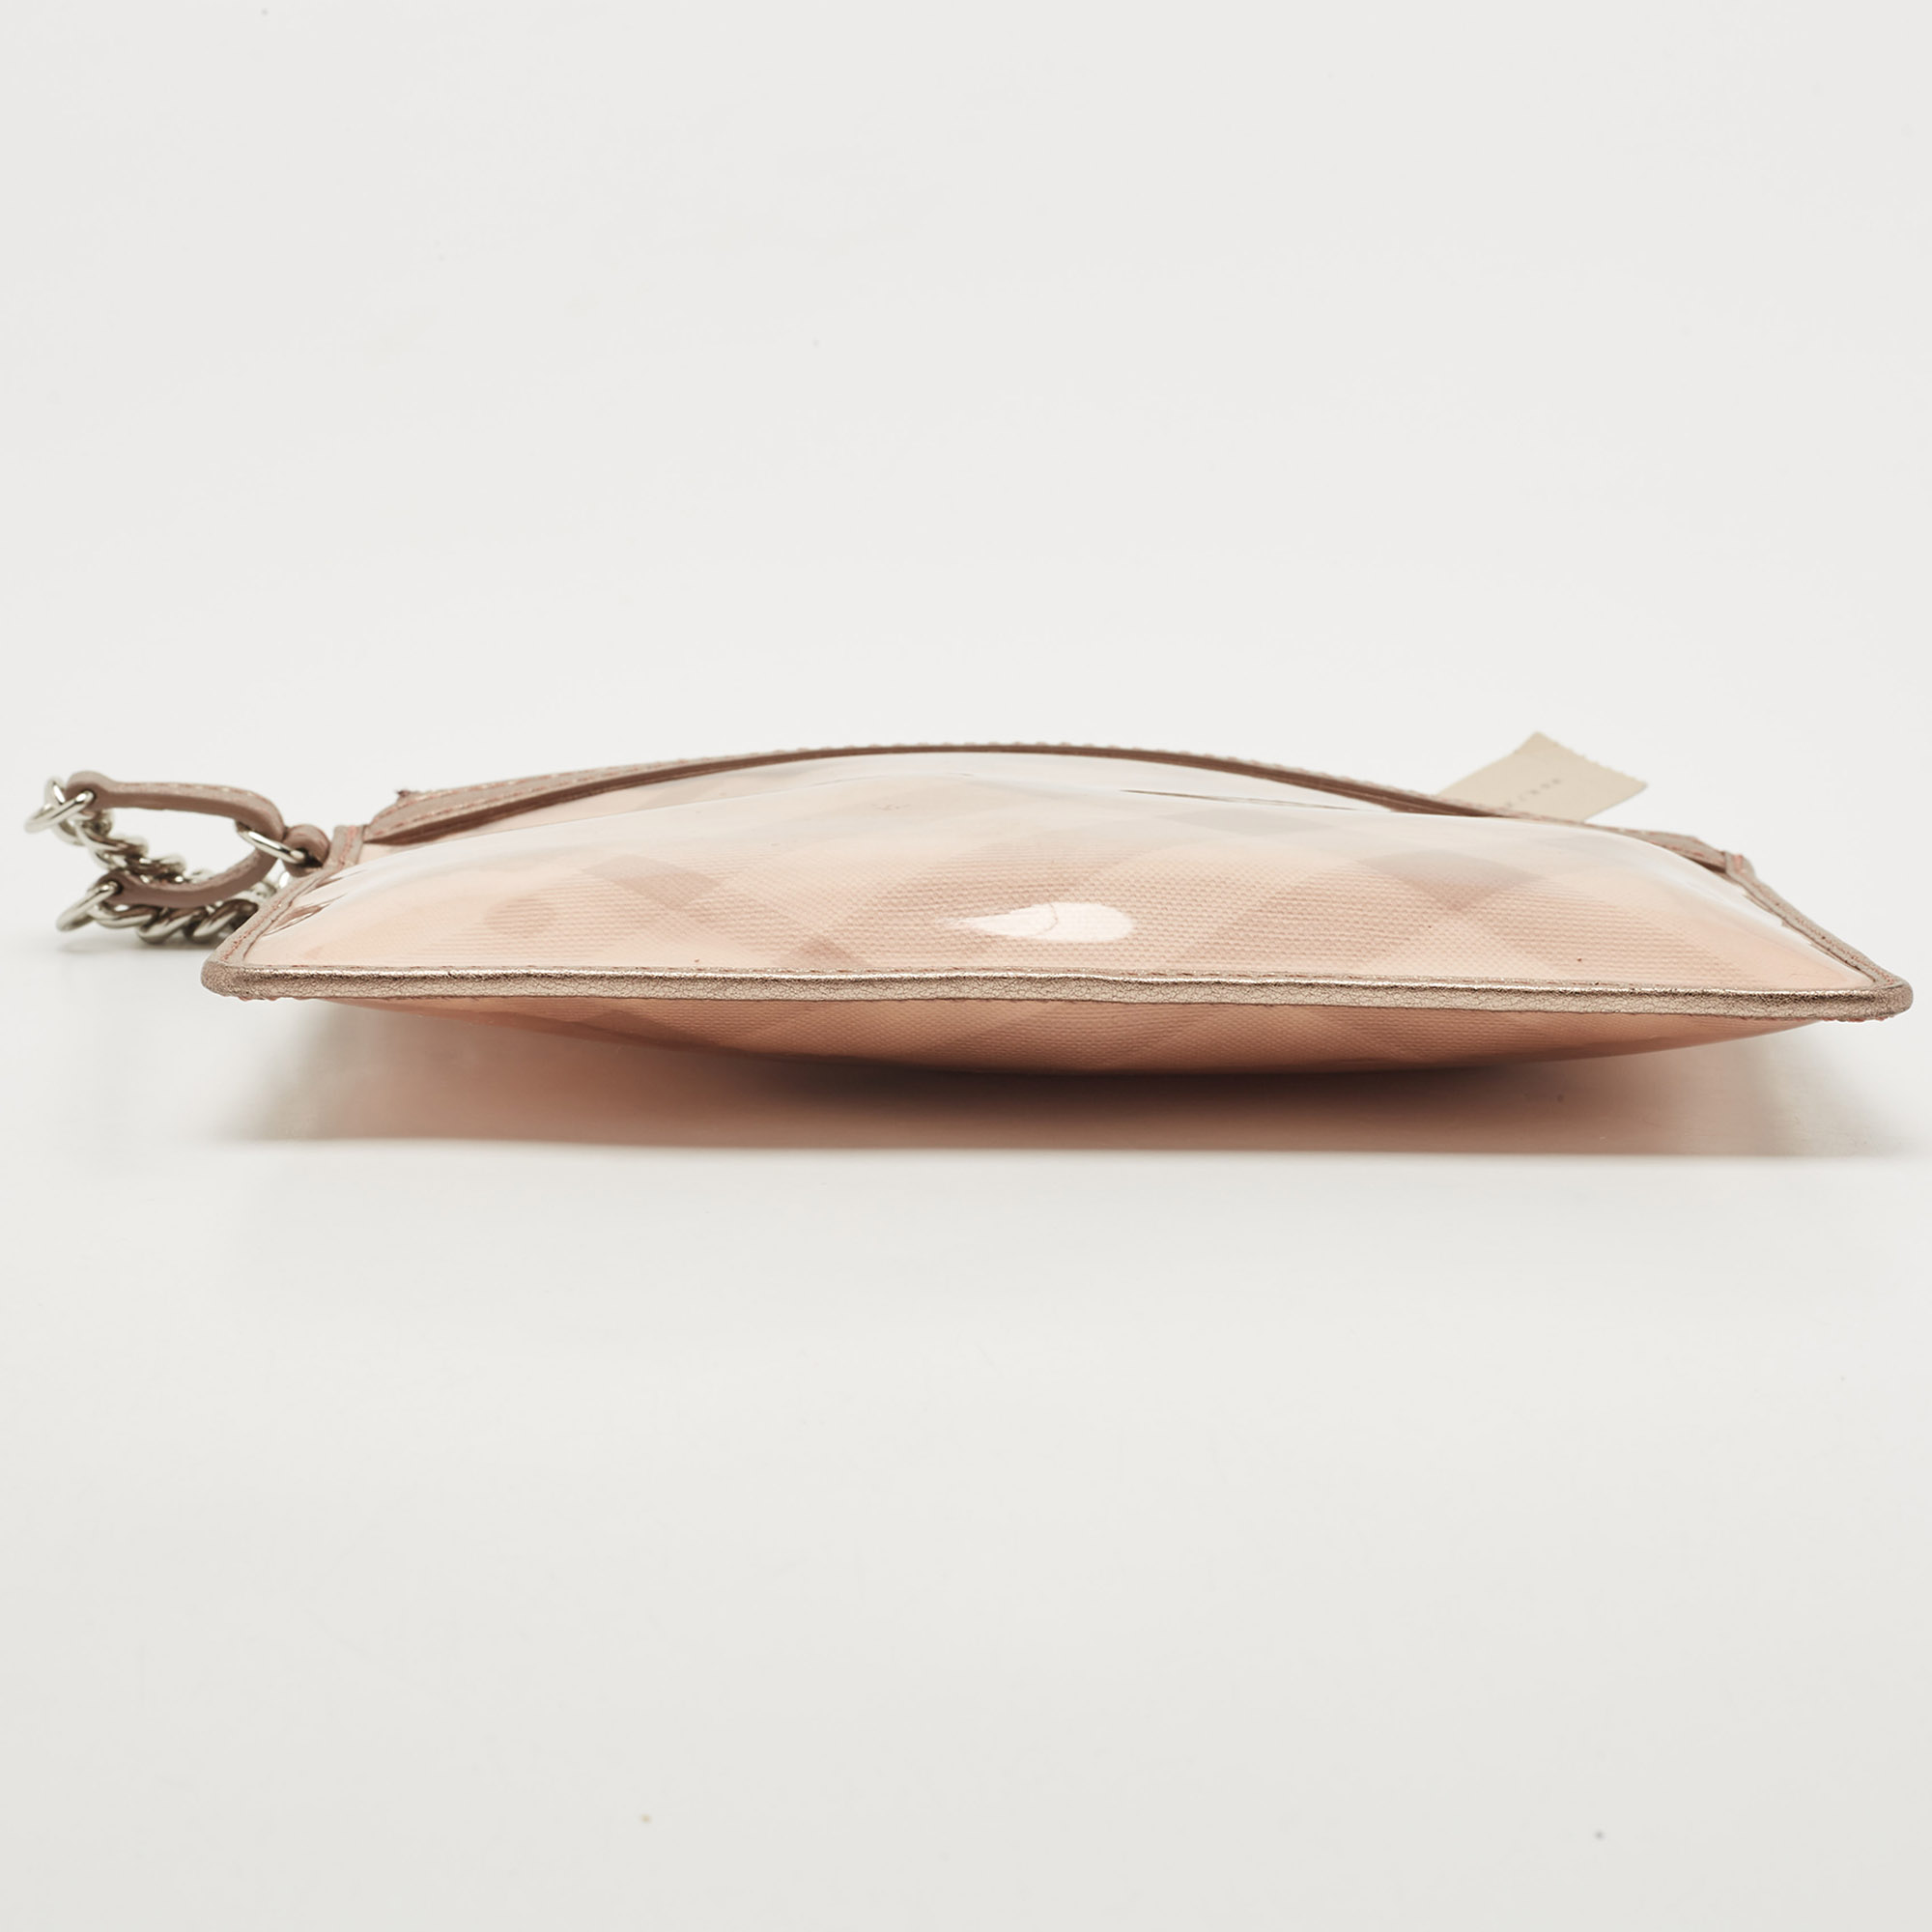 Burberry Metallic Beige/Cleart PVC And Leather Trim Wristlet Pouch